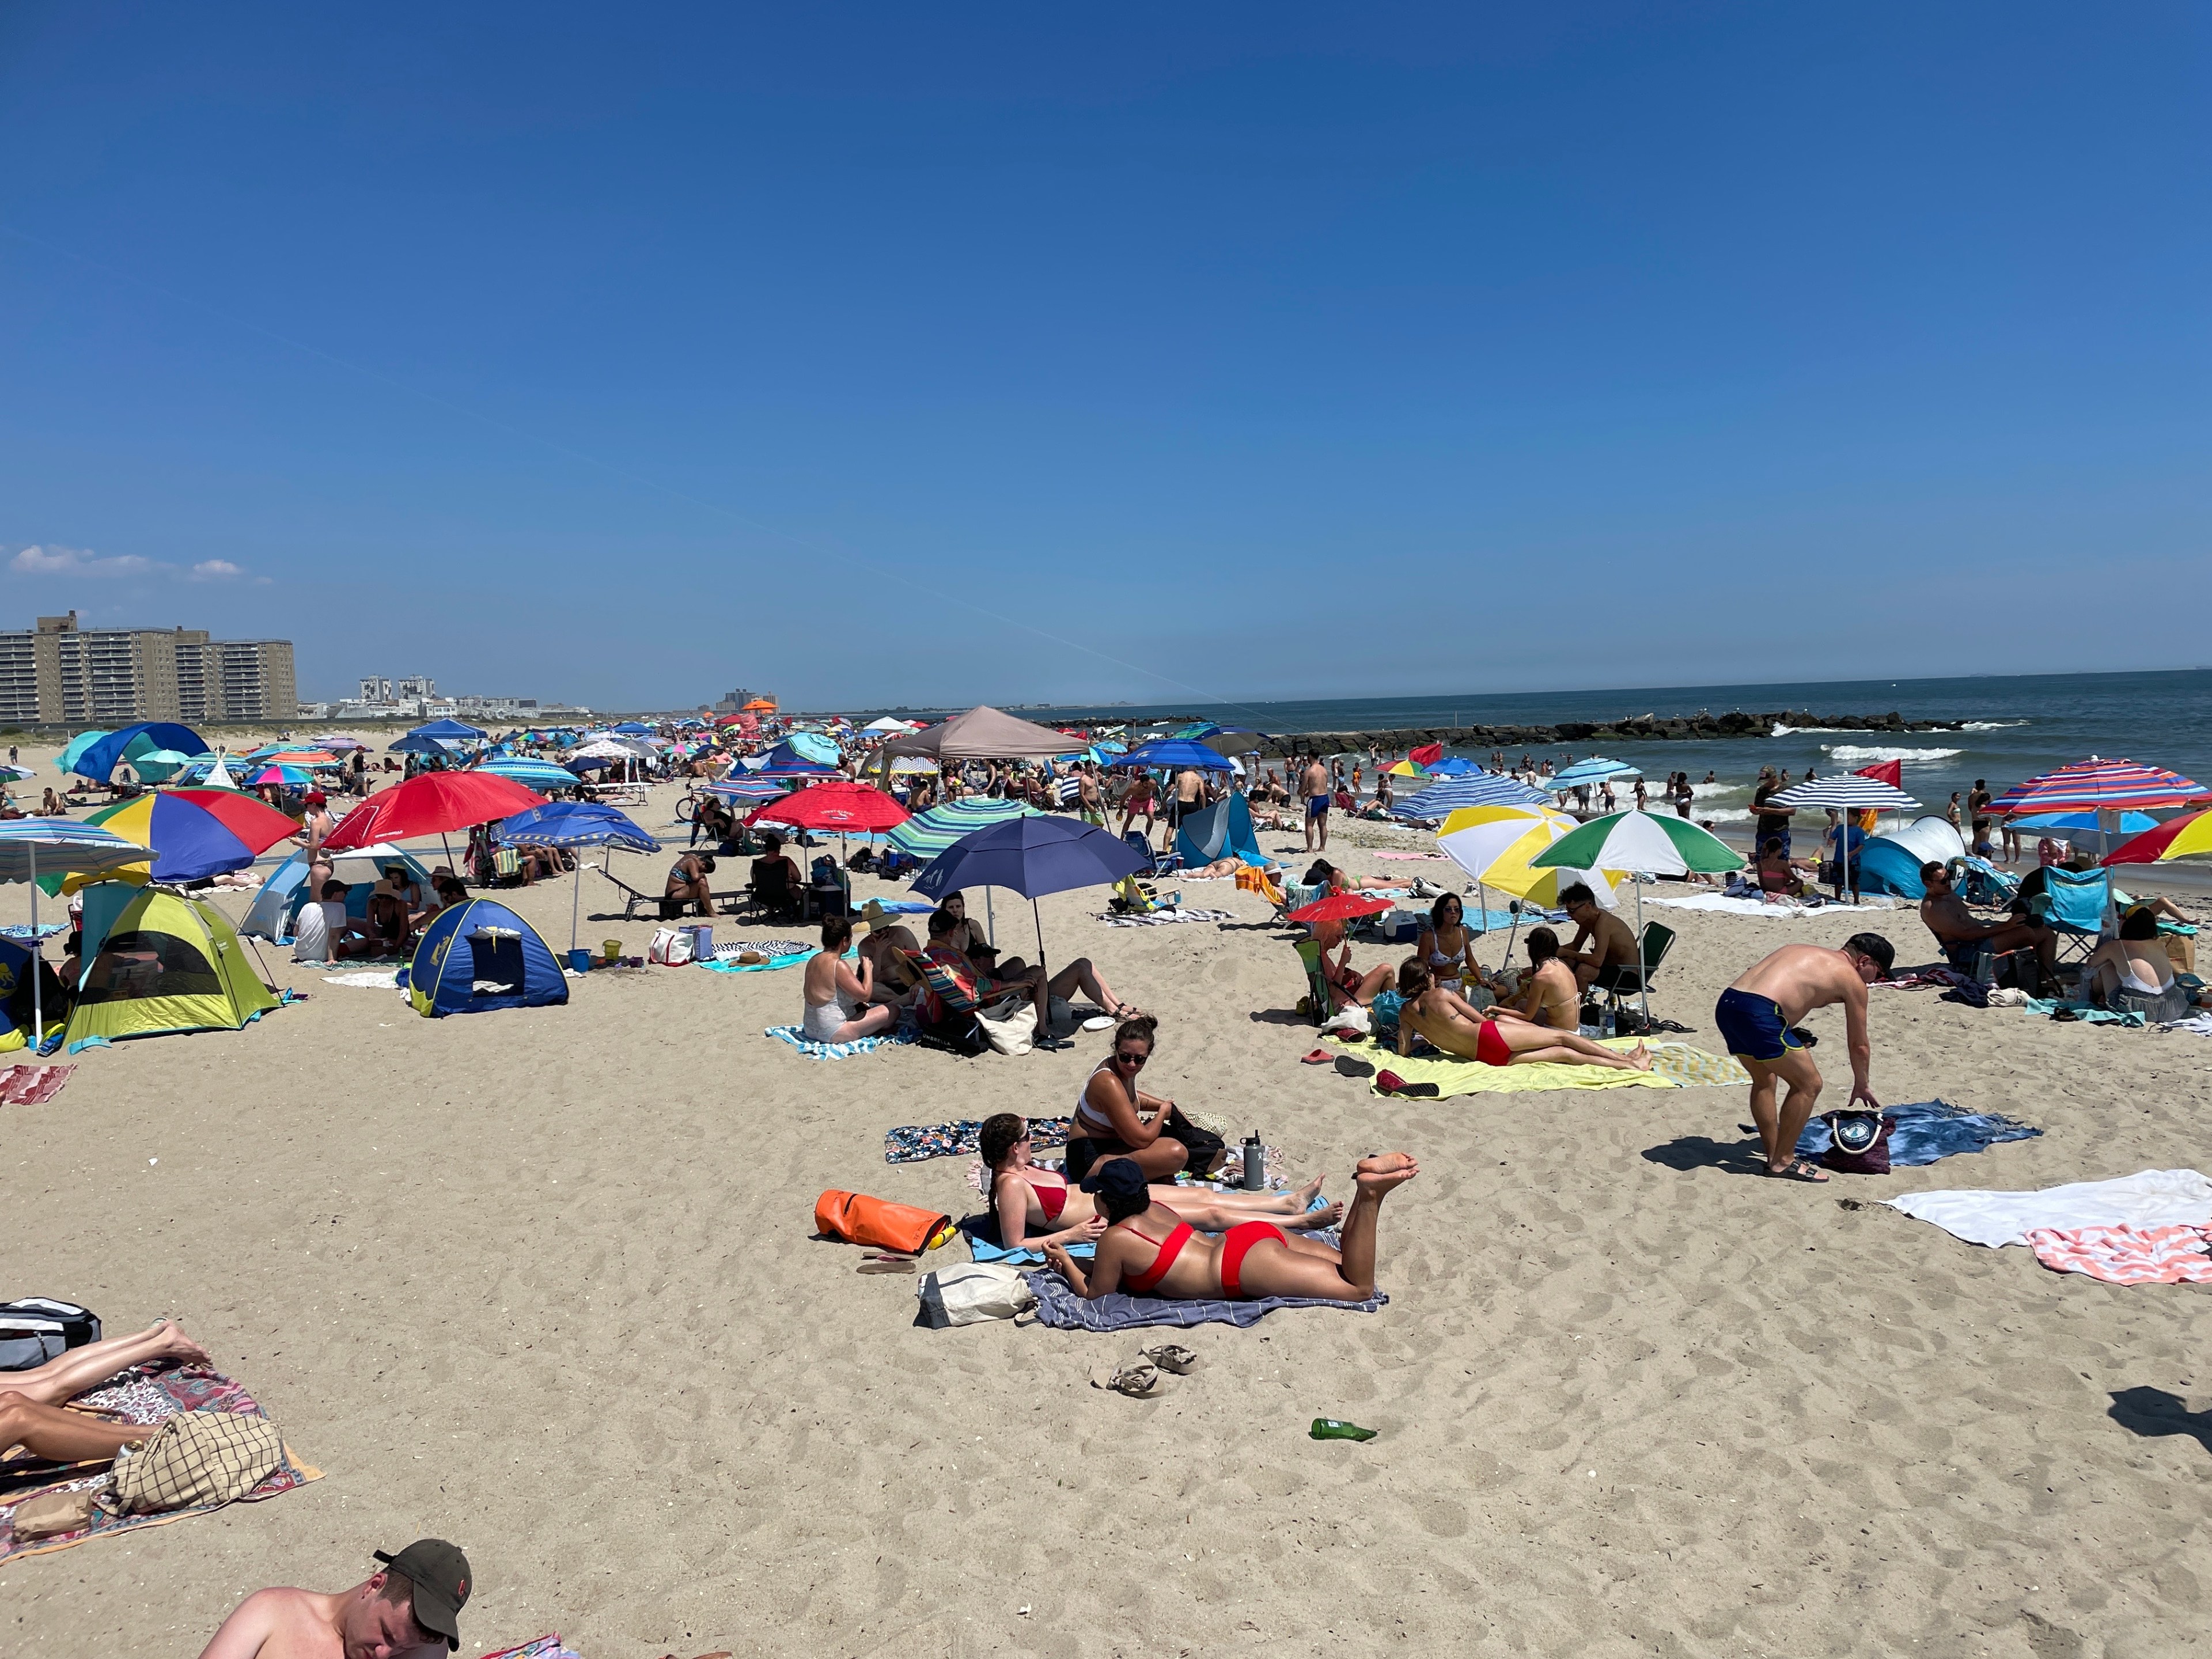 Hundreds of beachgoers sit on blankets on a brilliant summer day in the Rockaways.